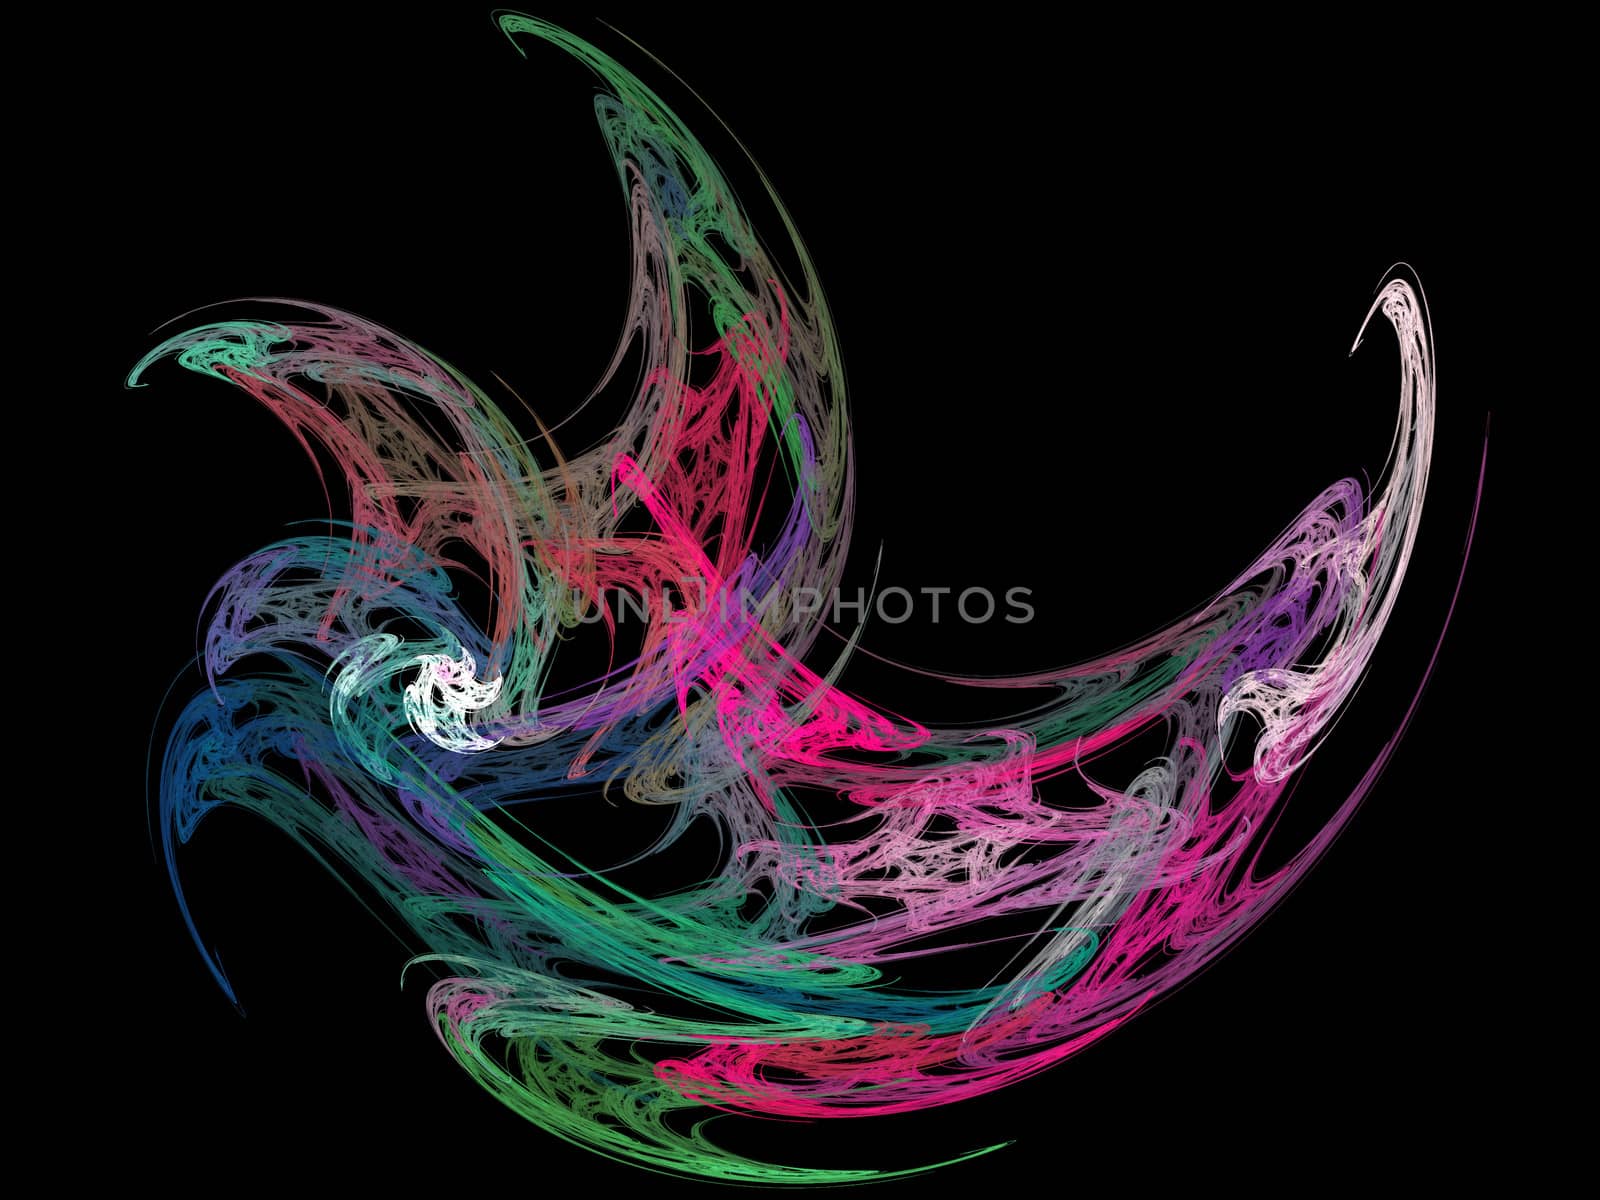 Abstract fractal color background, best viewed many details when viewed at full size